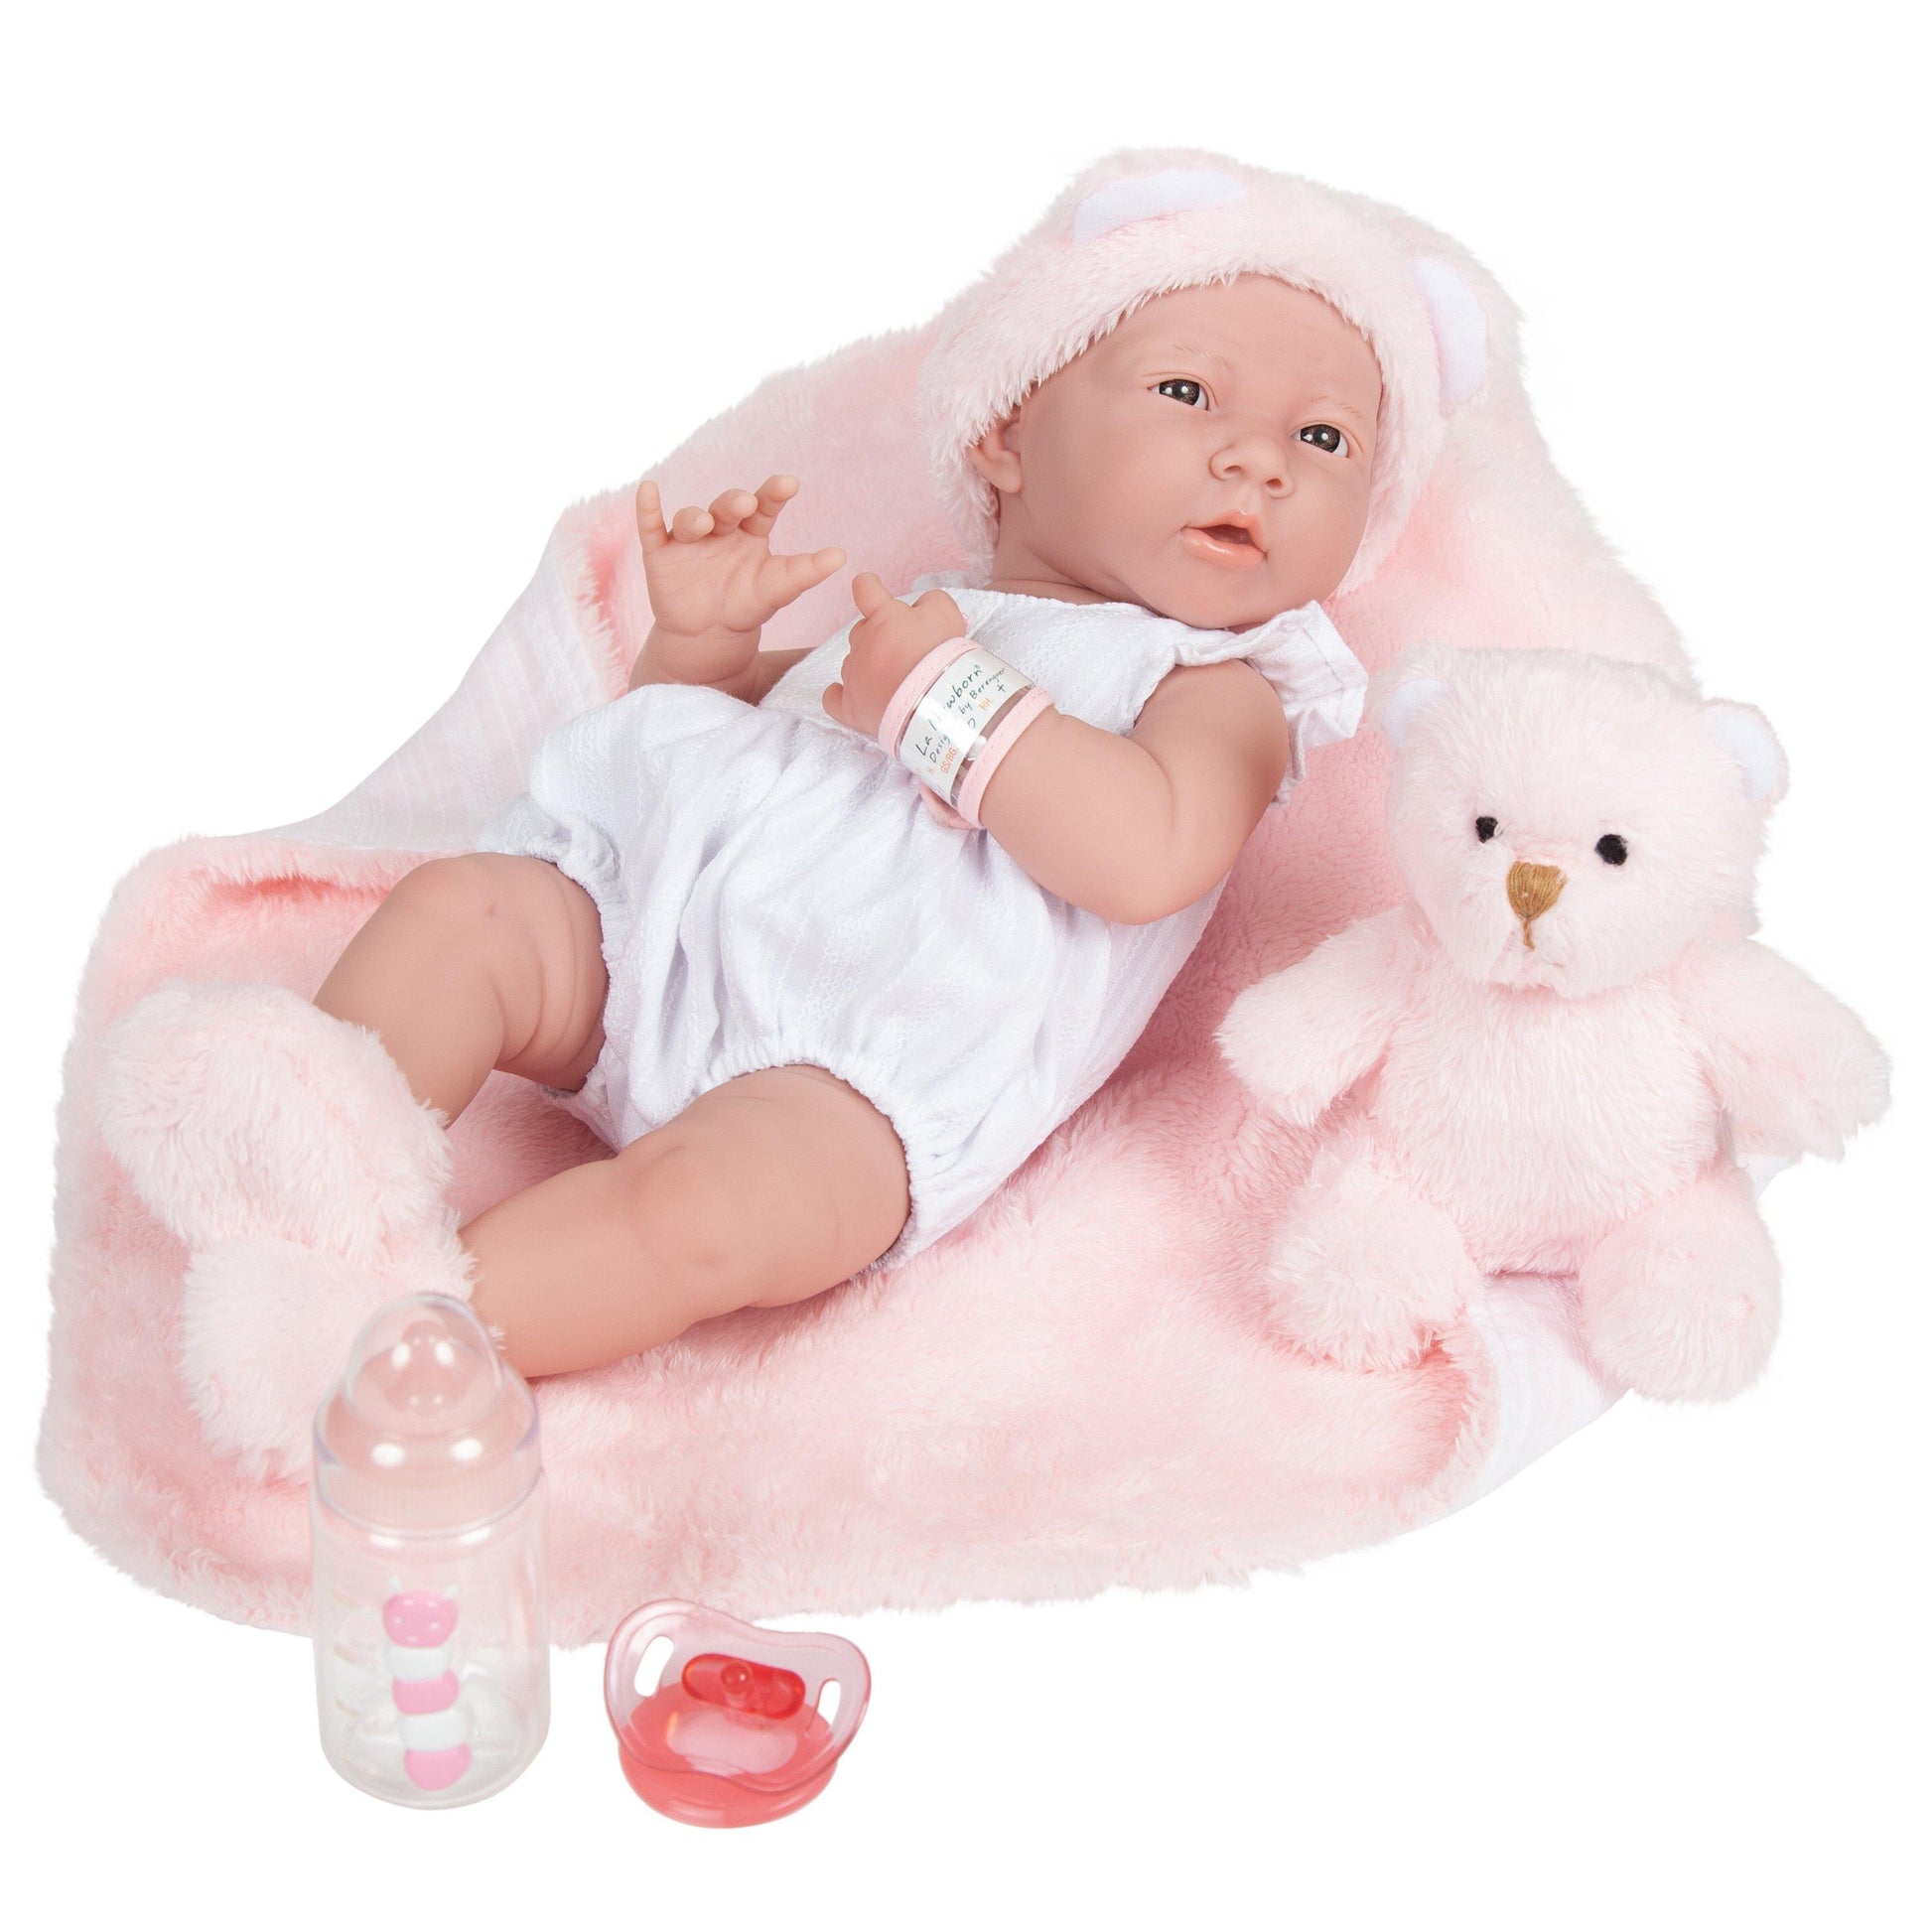 JC Toys,La Newborn All-Vinyl Real Girl 15in Baby Doll-White Outfit & Accessories - JC Toys Group Inc.